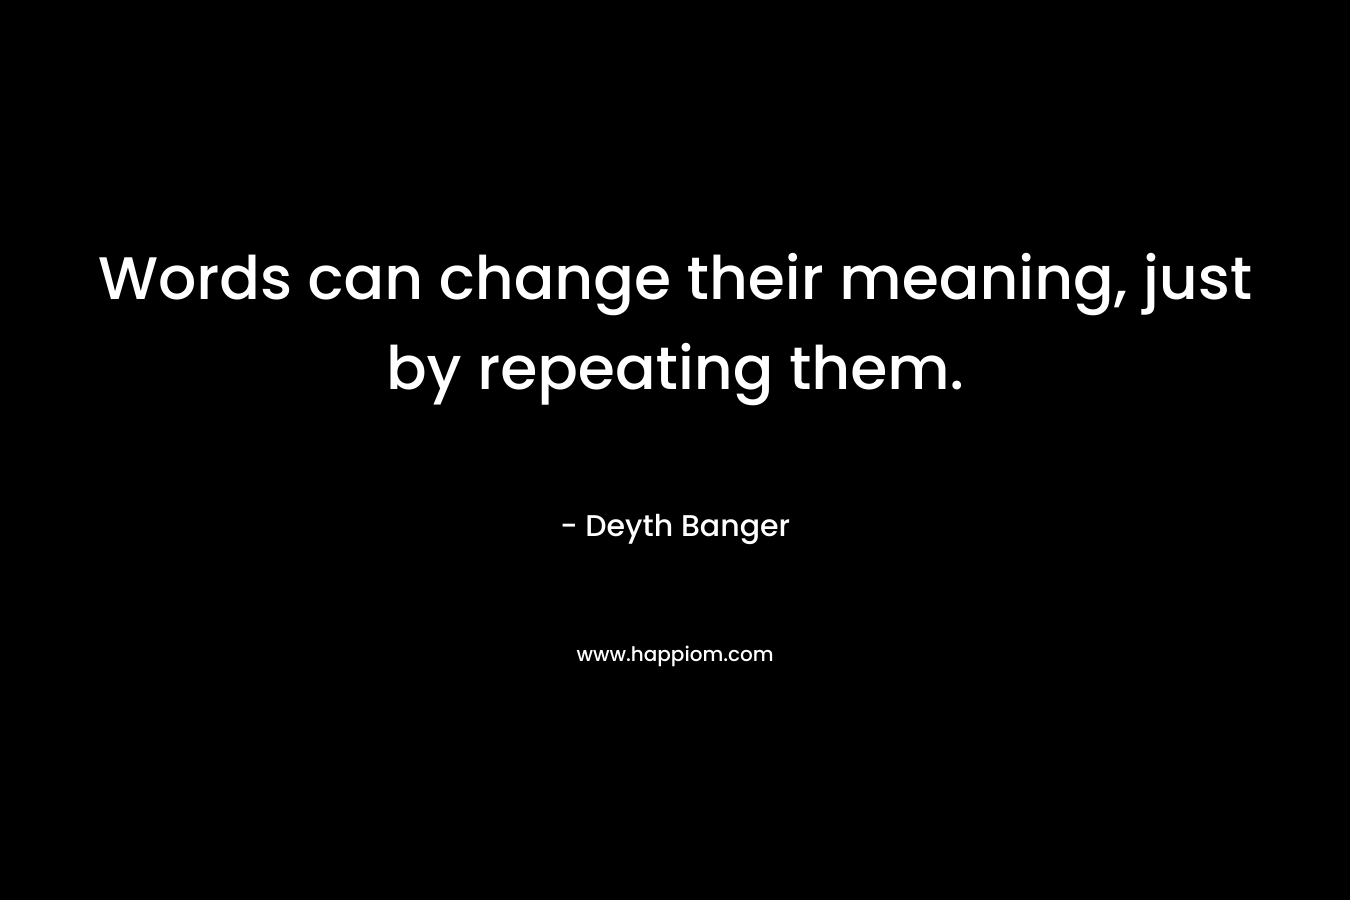 Words can change their meaning, just by repeating them. – Deyth Banger